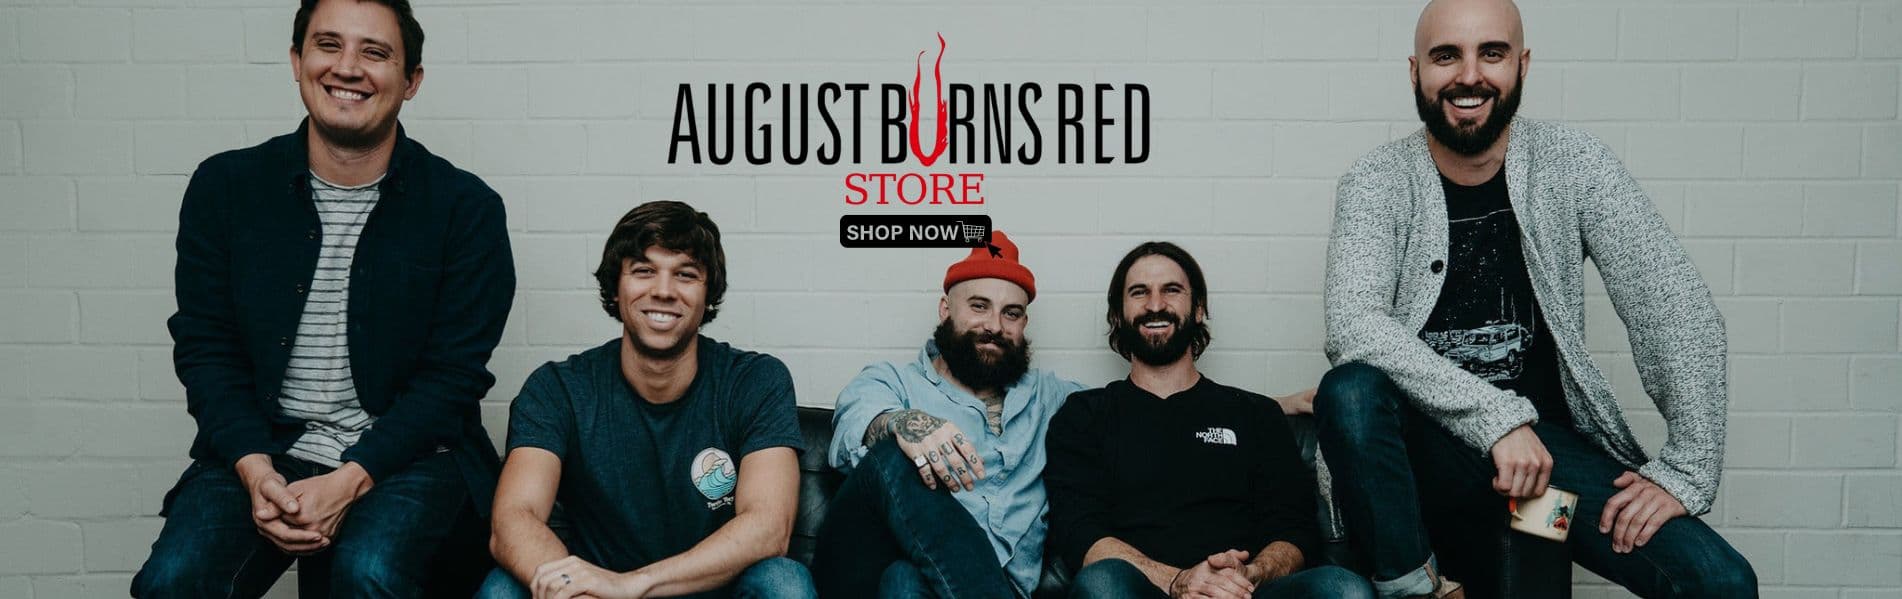 August Burns Red Banner